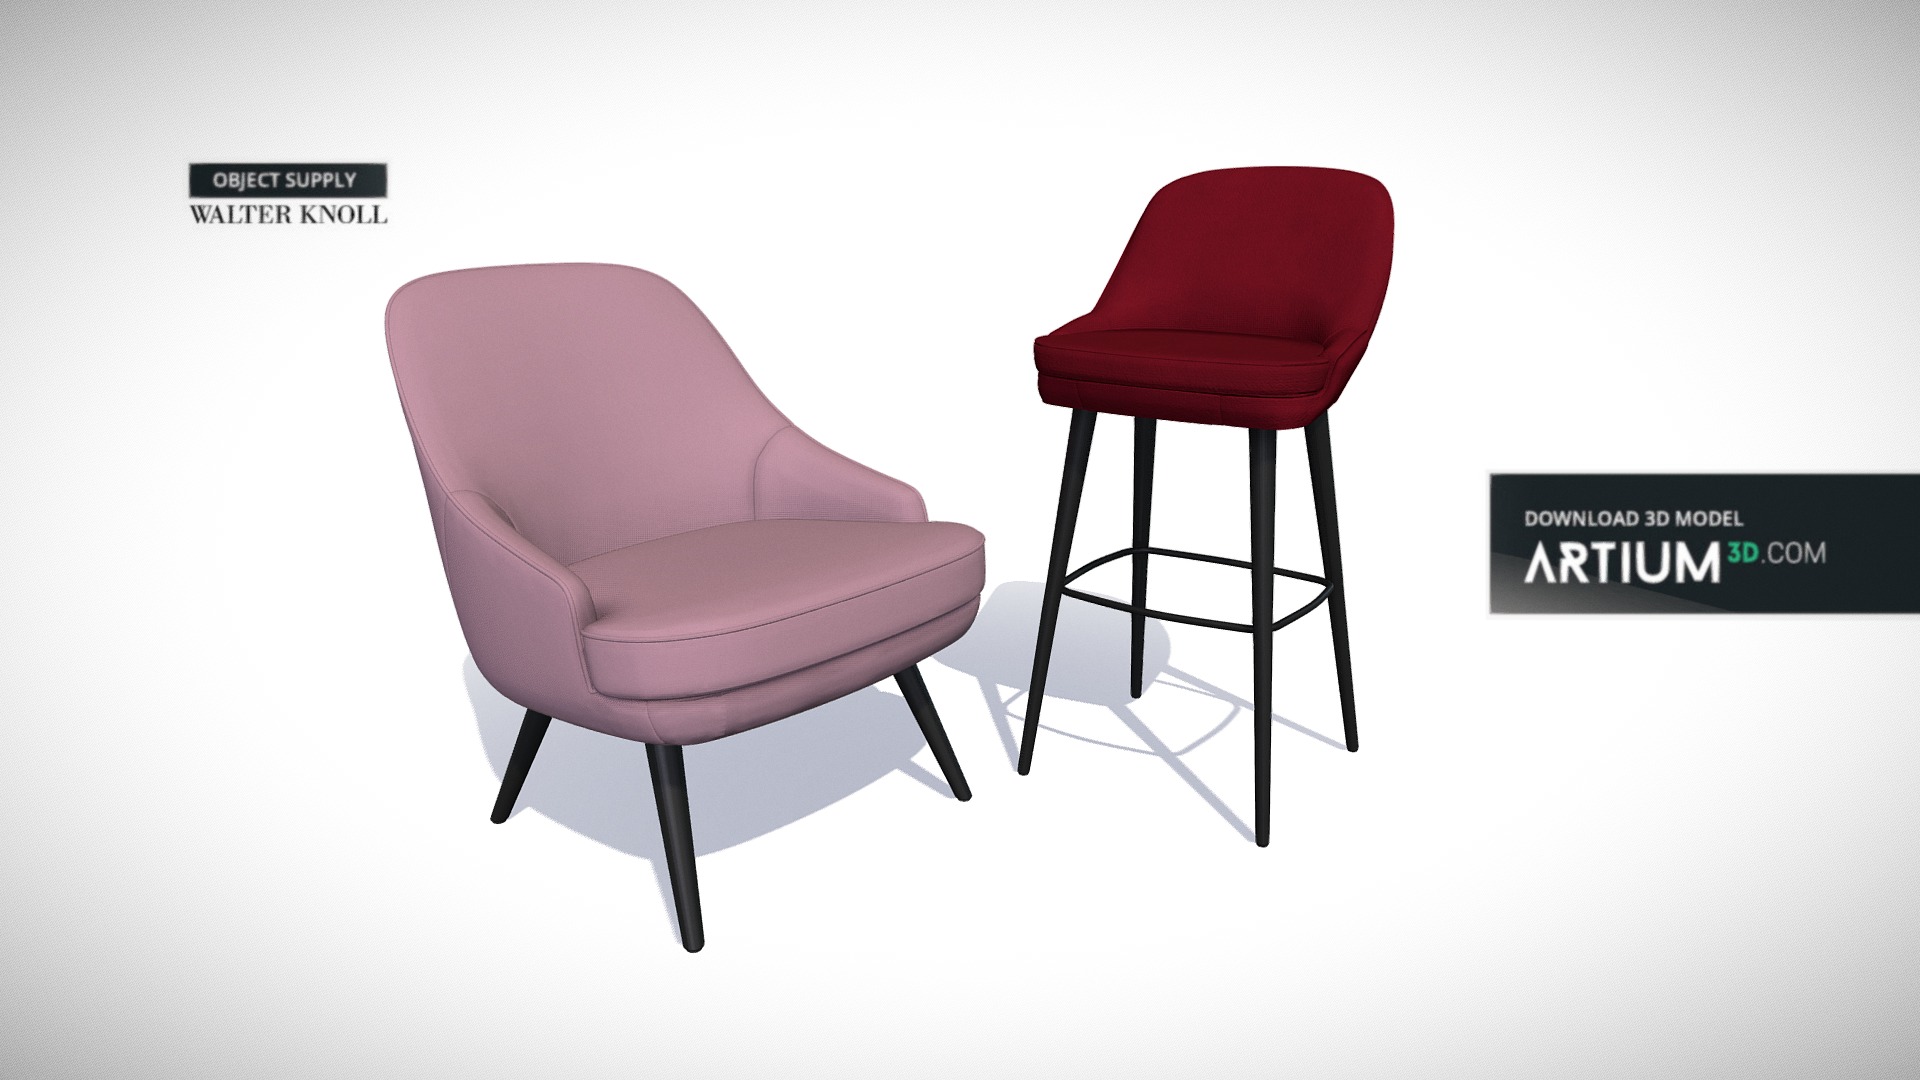 3D model Chair and Bar chair from Walter Knoll - This is a 3D model of the Chair and Bar chair from Walter Knoll. The 3D model is about a red chair and a black chair.